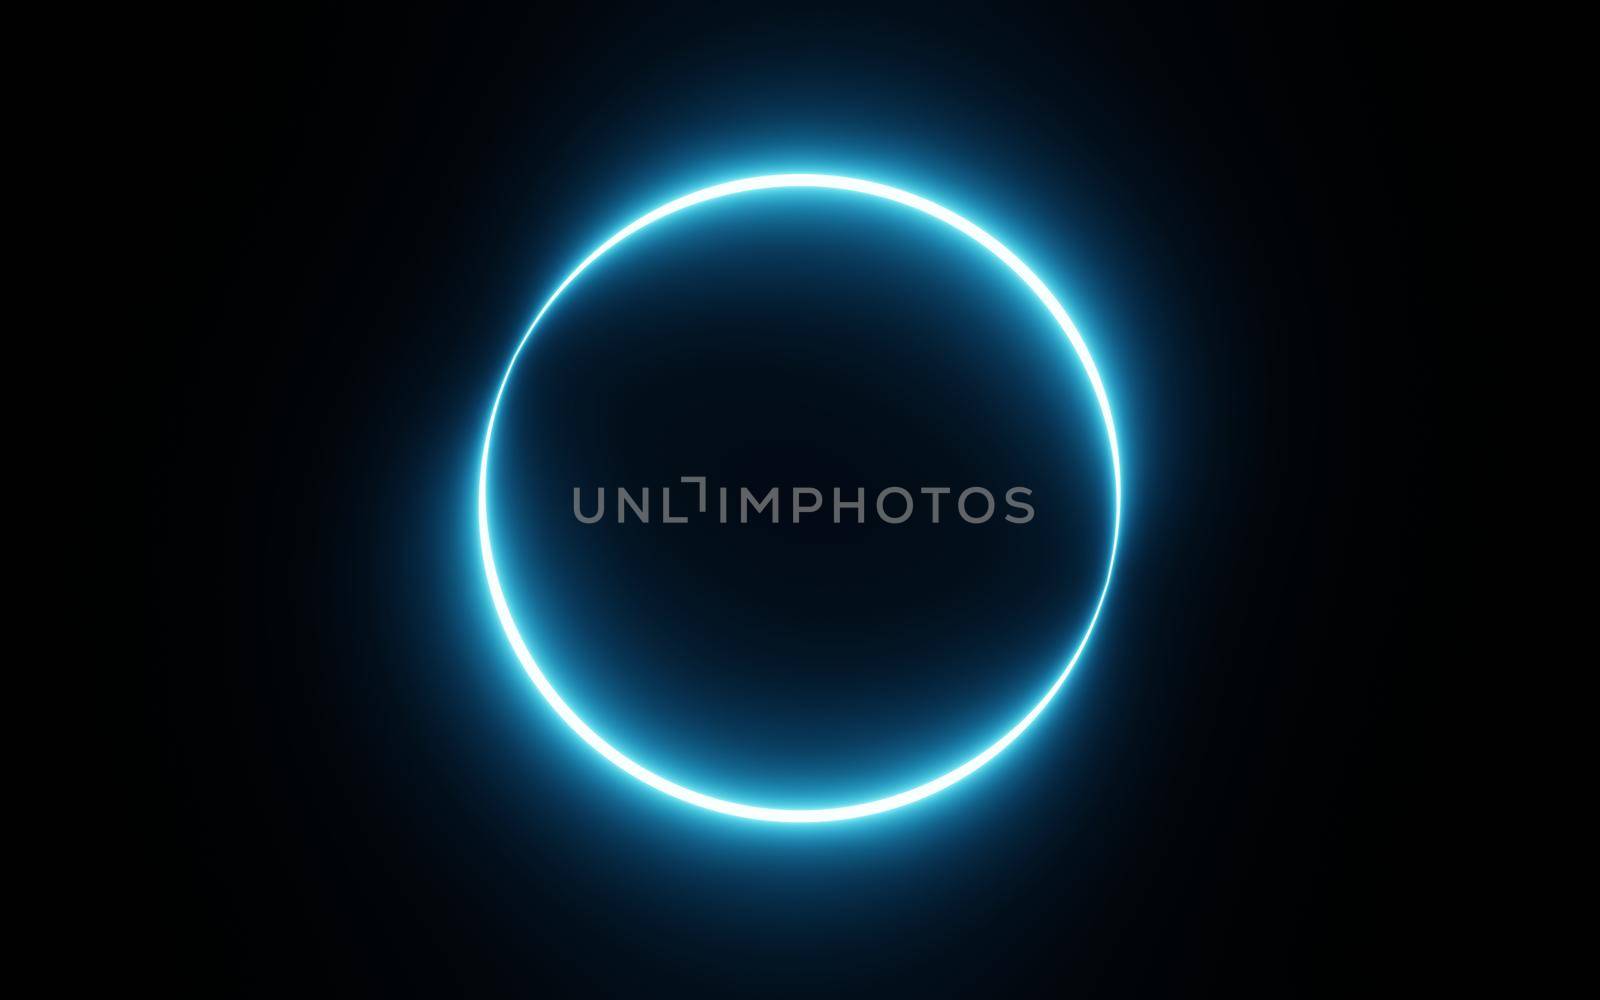 Round circle picture frame with blue tone neon color shade motion graphic on isolated black background. Blue and pink light moving for overlay element. 3D illustration rendering. Empty space in middle